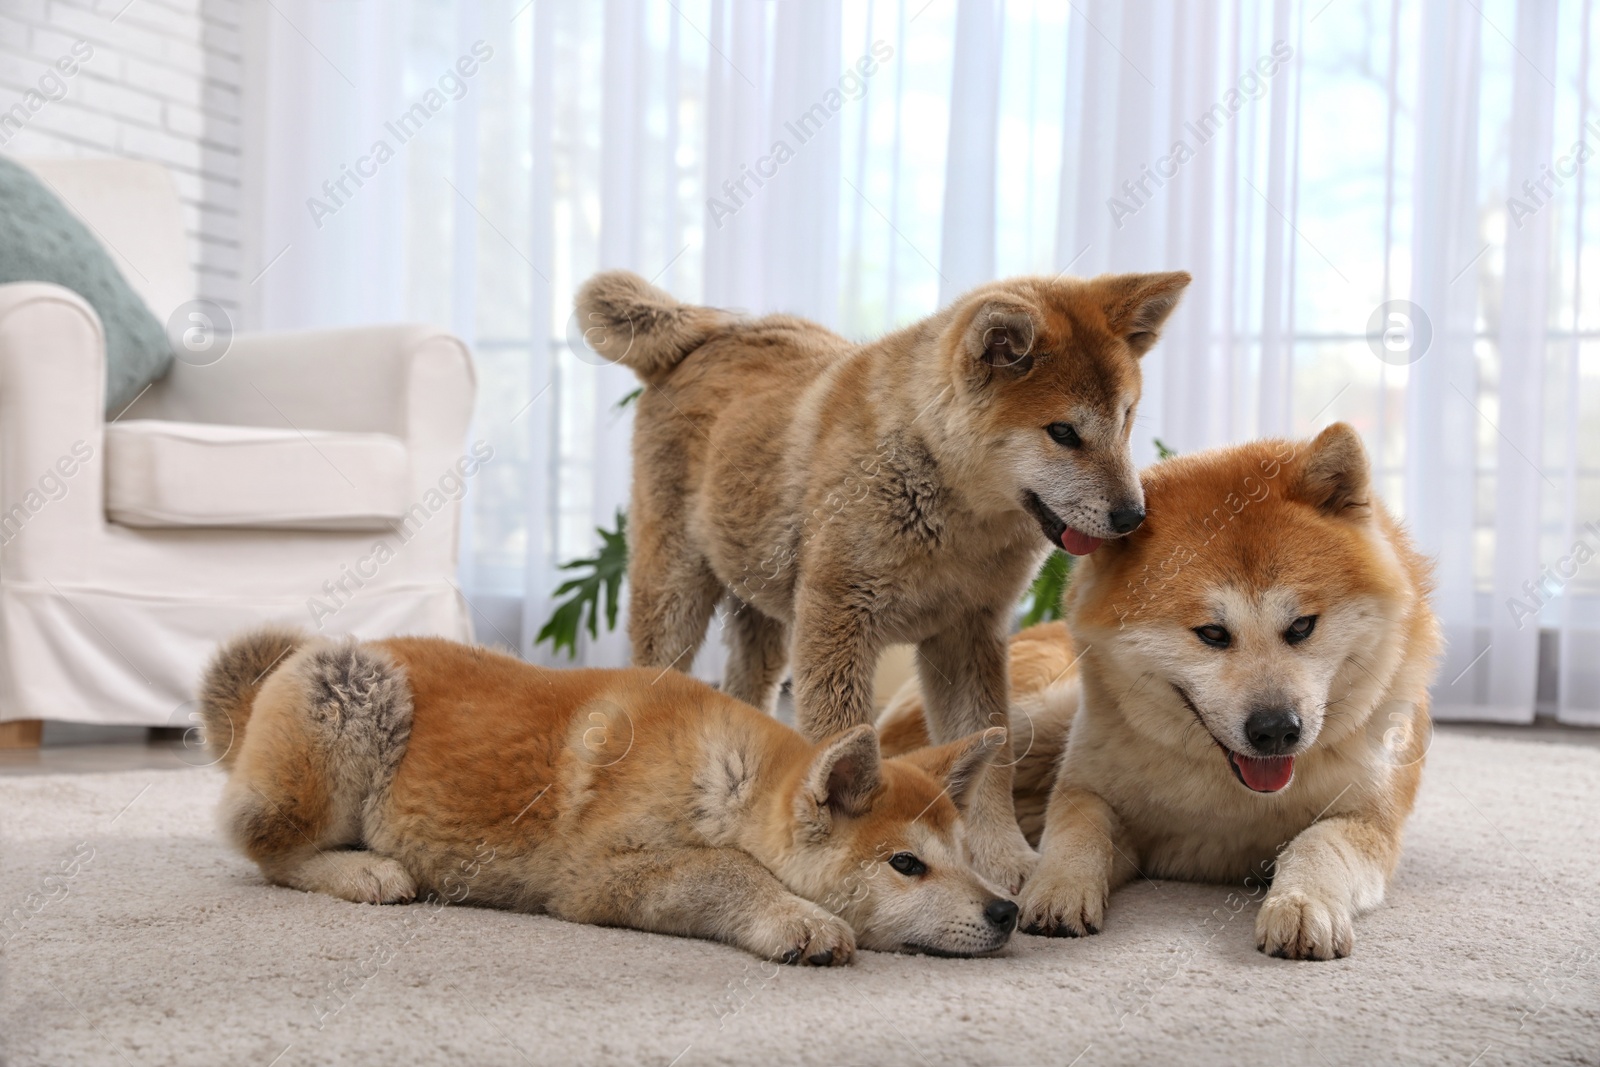 Photo of Adorable Akita Inu dog and puppies in living room